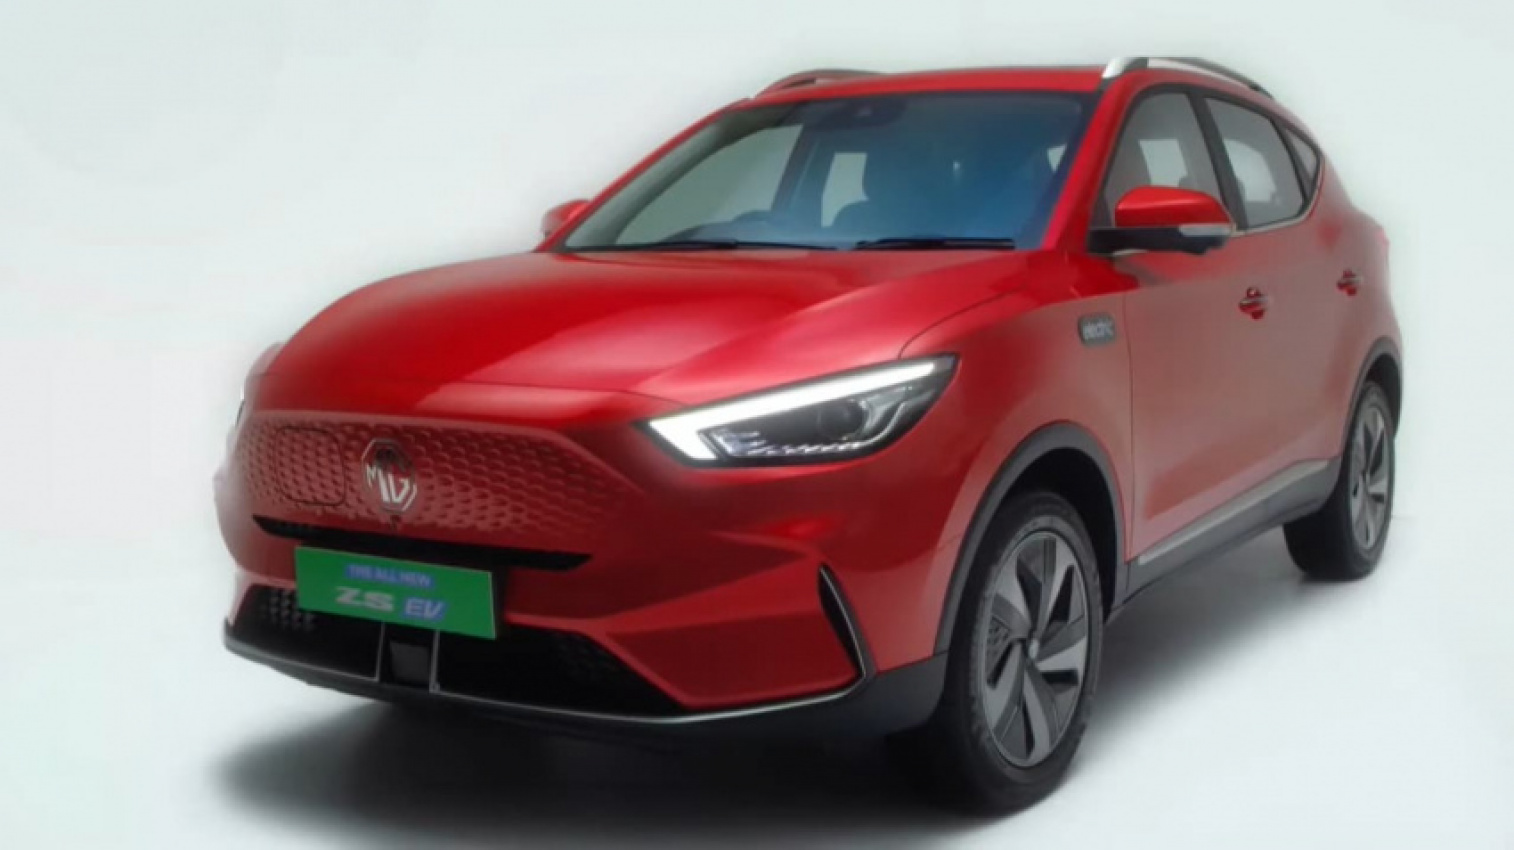 android, autos, cars, mg, auto news, carandbike, mg motor india, mg zs, mg zs electric suv, mg zs ev, news, zs ev facelift, zs ev features, android, 2022 mg zs ev facelift: all you need to know